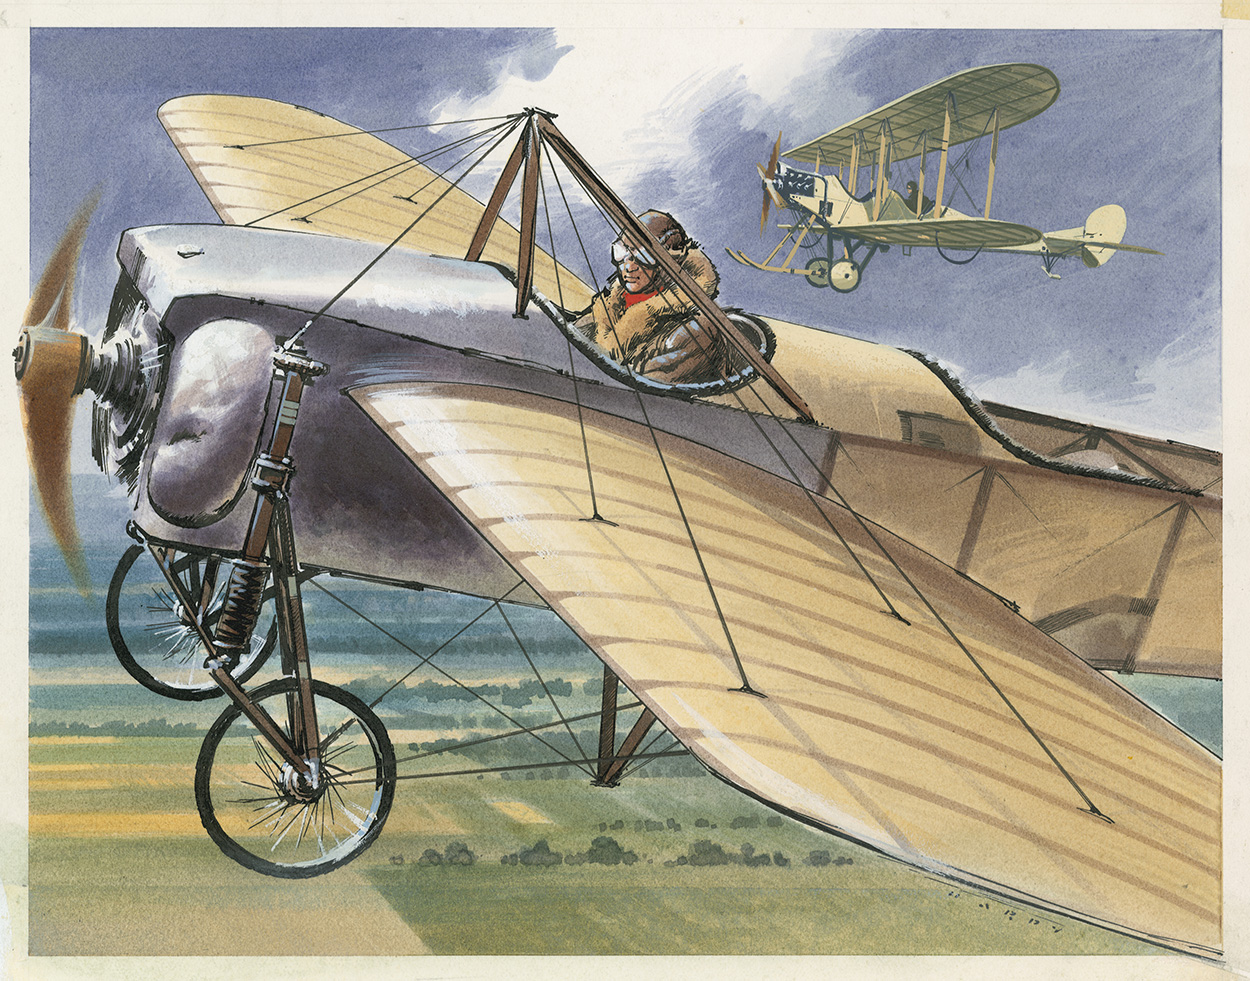 Bleriot X1 Monoplane (Original) (Signed) art by Air (Wilf Hardy) at The Illustration Art Gallery